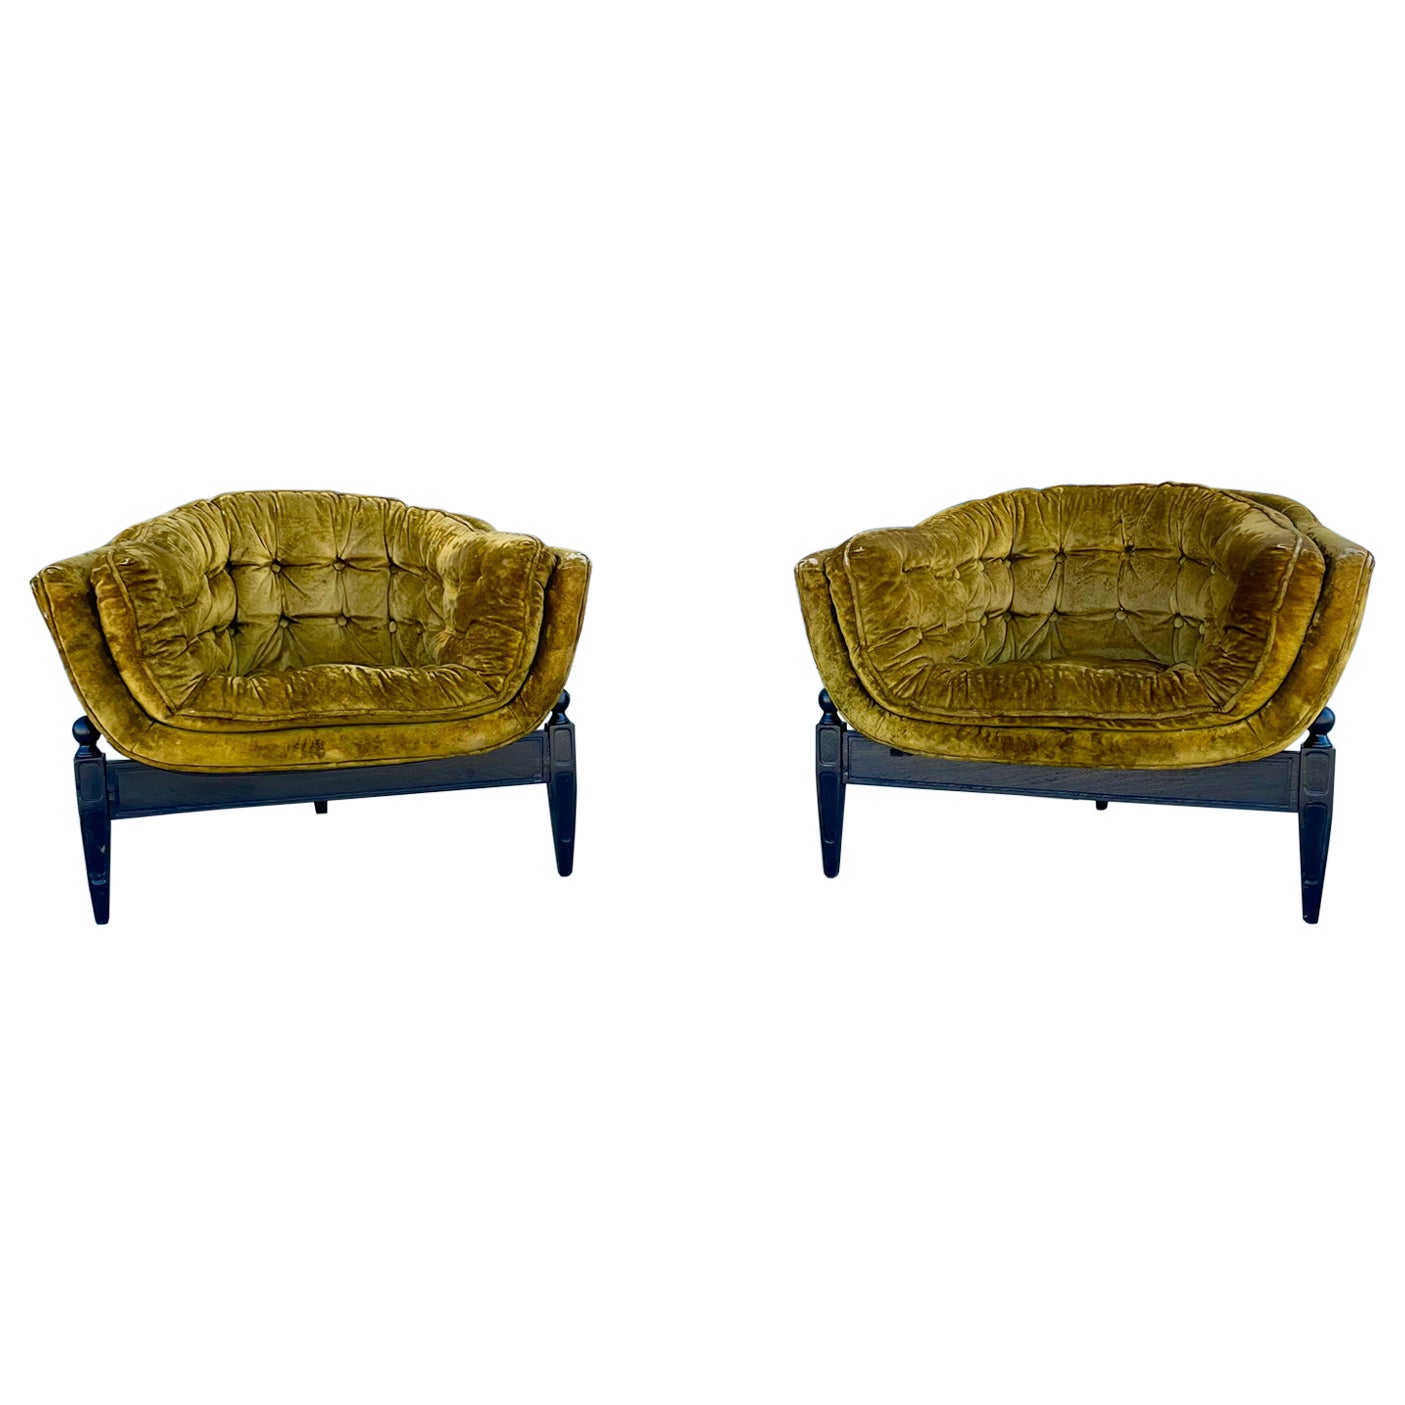 Mid-Century Barrel Lounge Chairs Styled After Adrian Pearsall